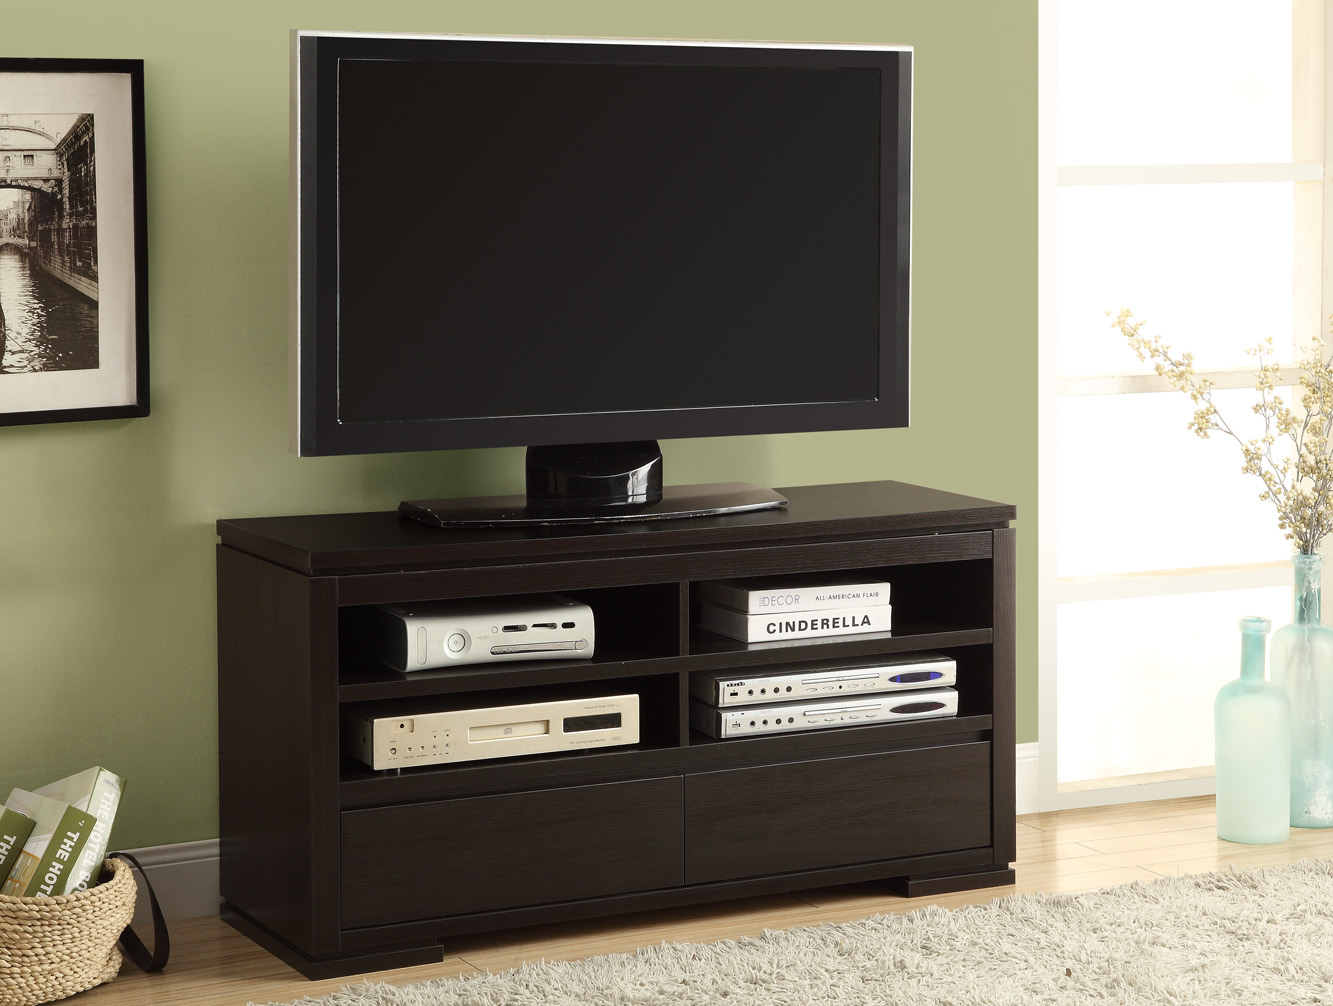 TV STAND - 48"L / CAPPUCCINO WITH 2 DRAWERS